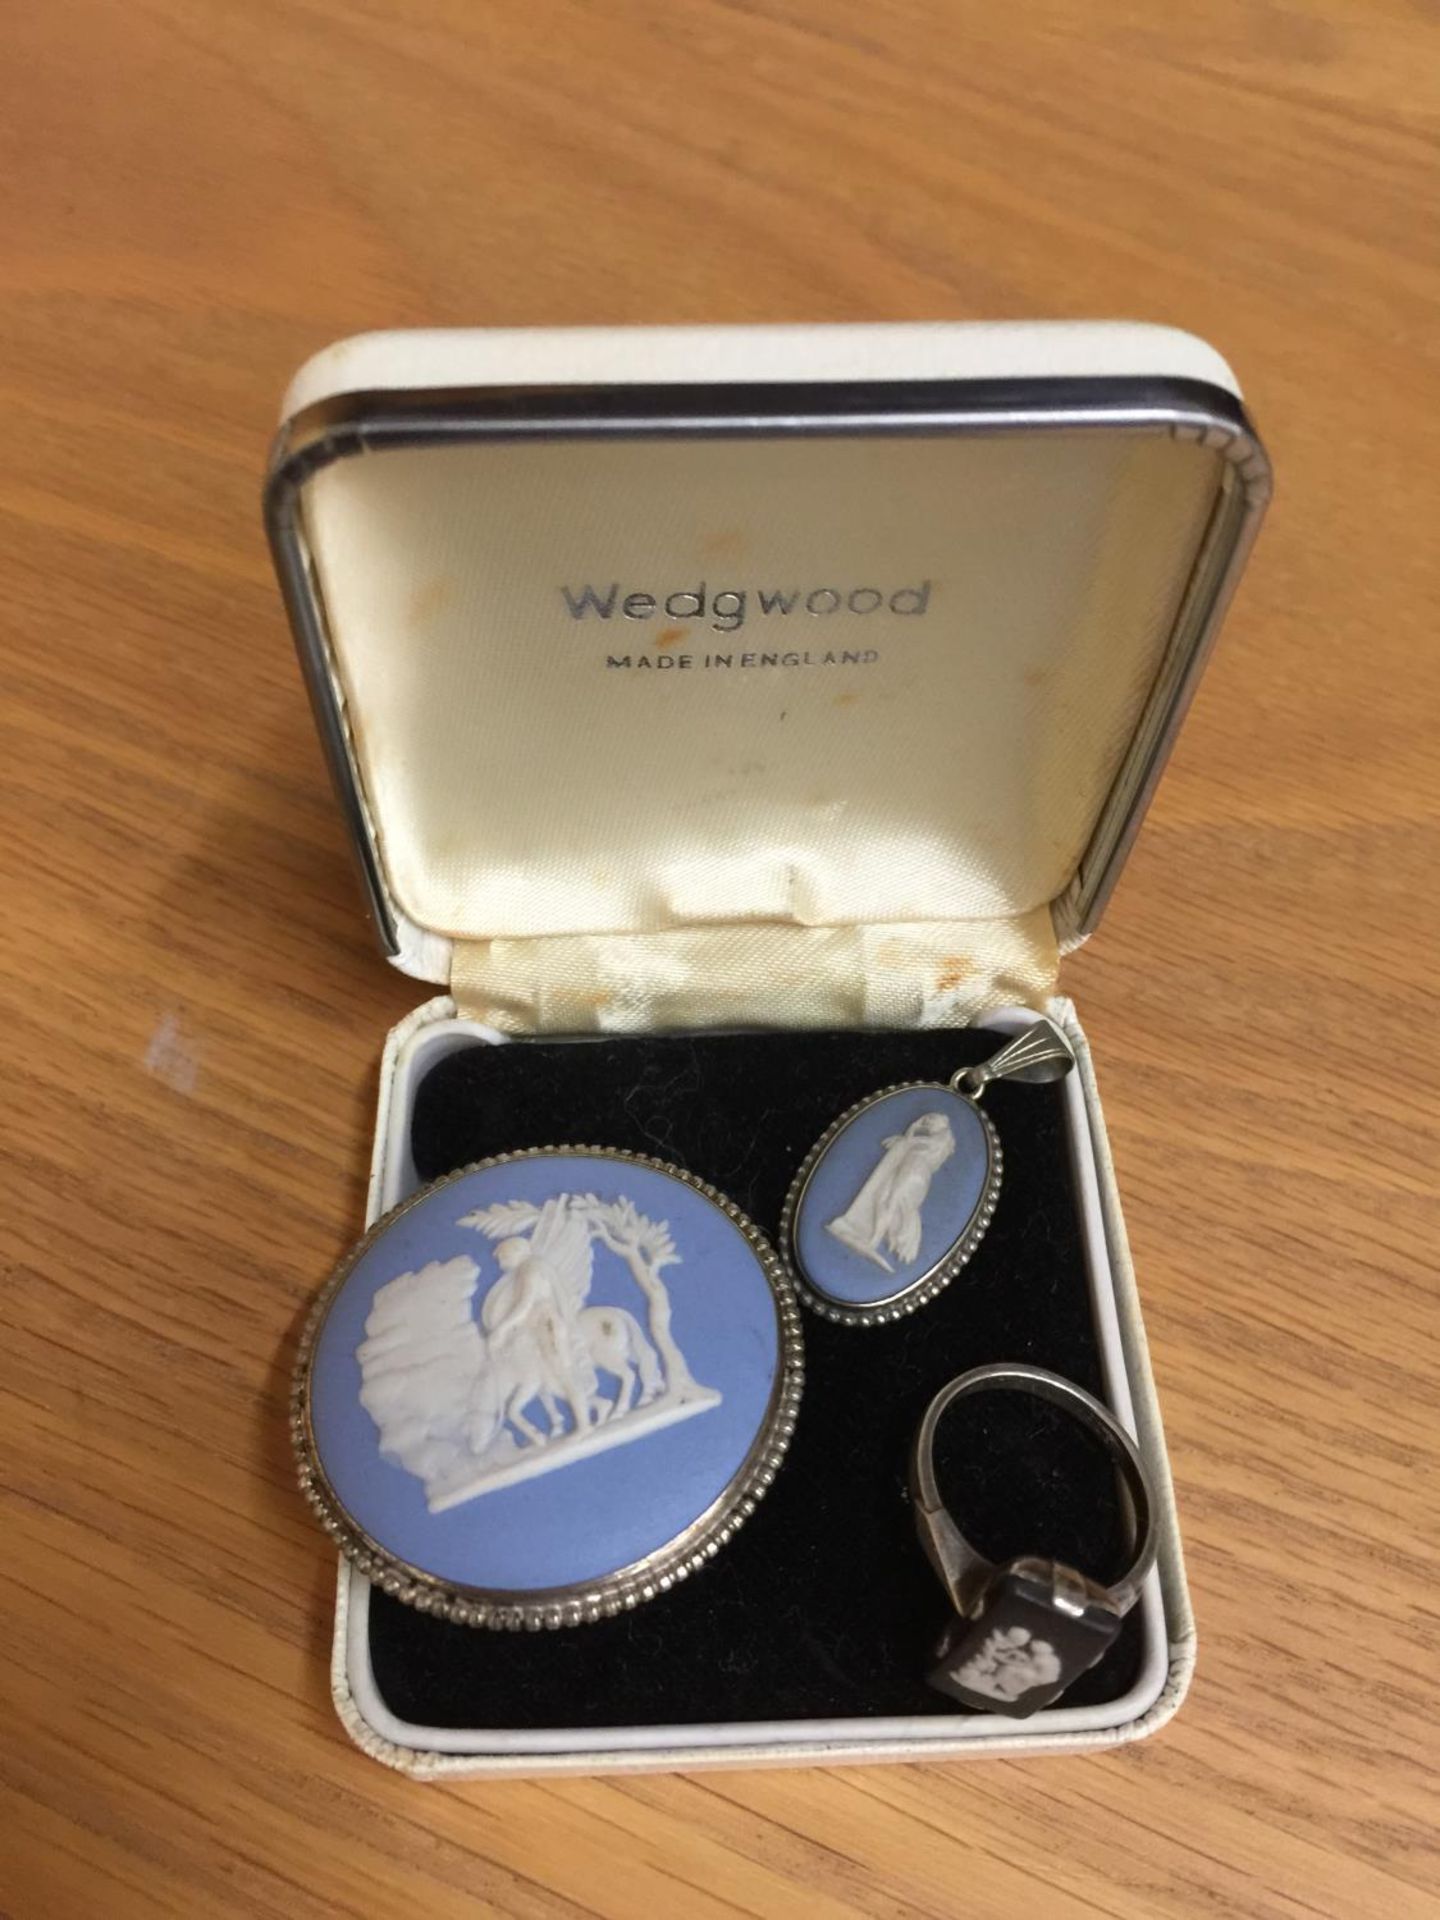 THREE SILVER AND WEDGWOOD ITEMS TO INCLUDE A BROOCH, RING AND PENDANT IN A WEDGEWOOD PRESENTATION